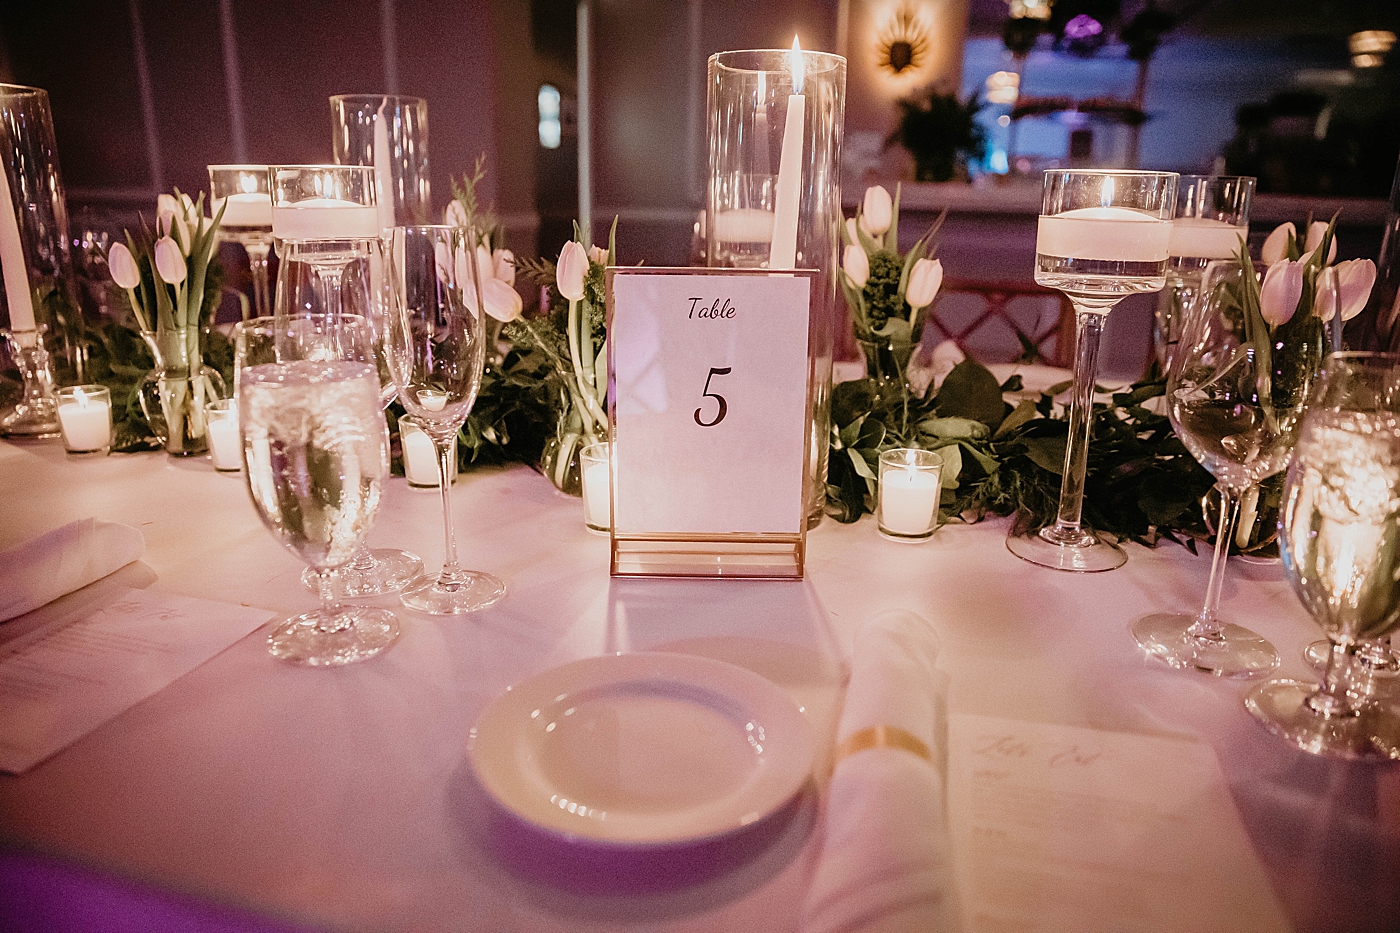 Romantic Wedding During COVID-19 captured by West Palm Beach Wedding Photographer, Krystal Capone Photography